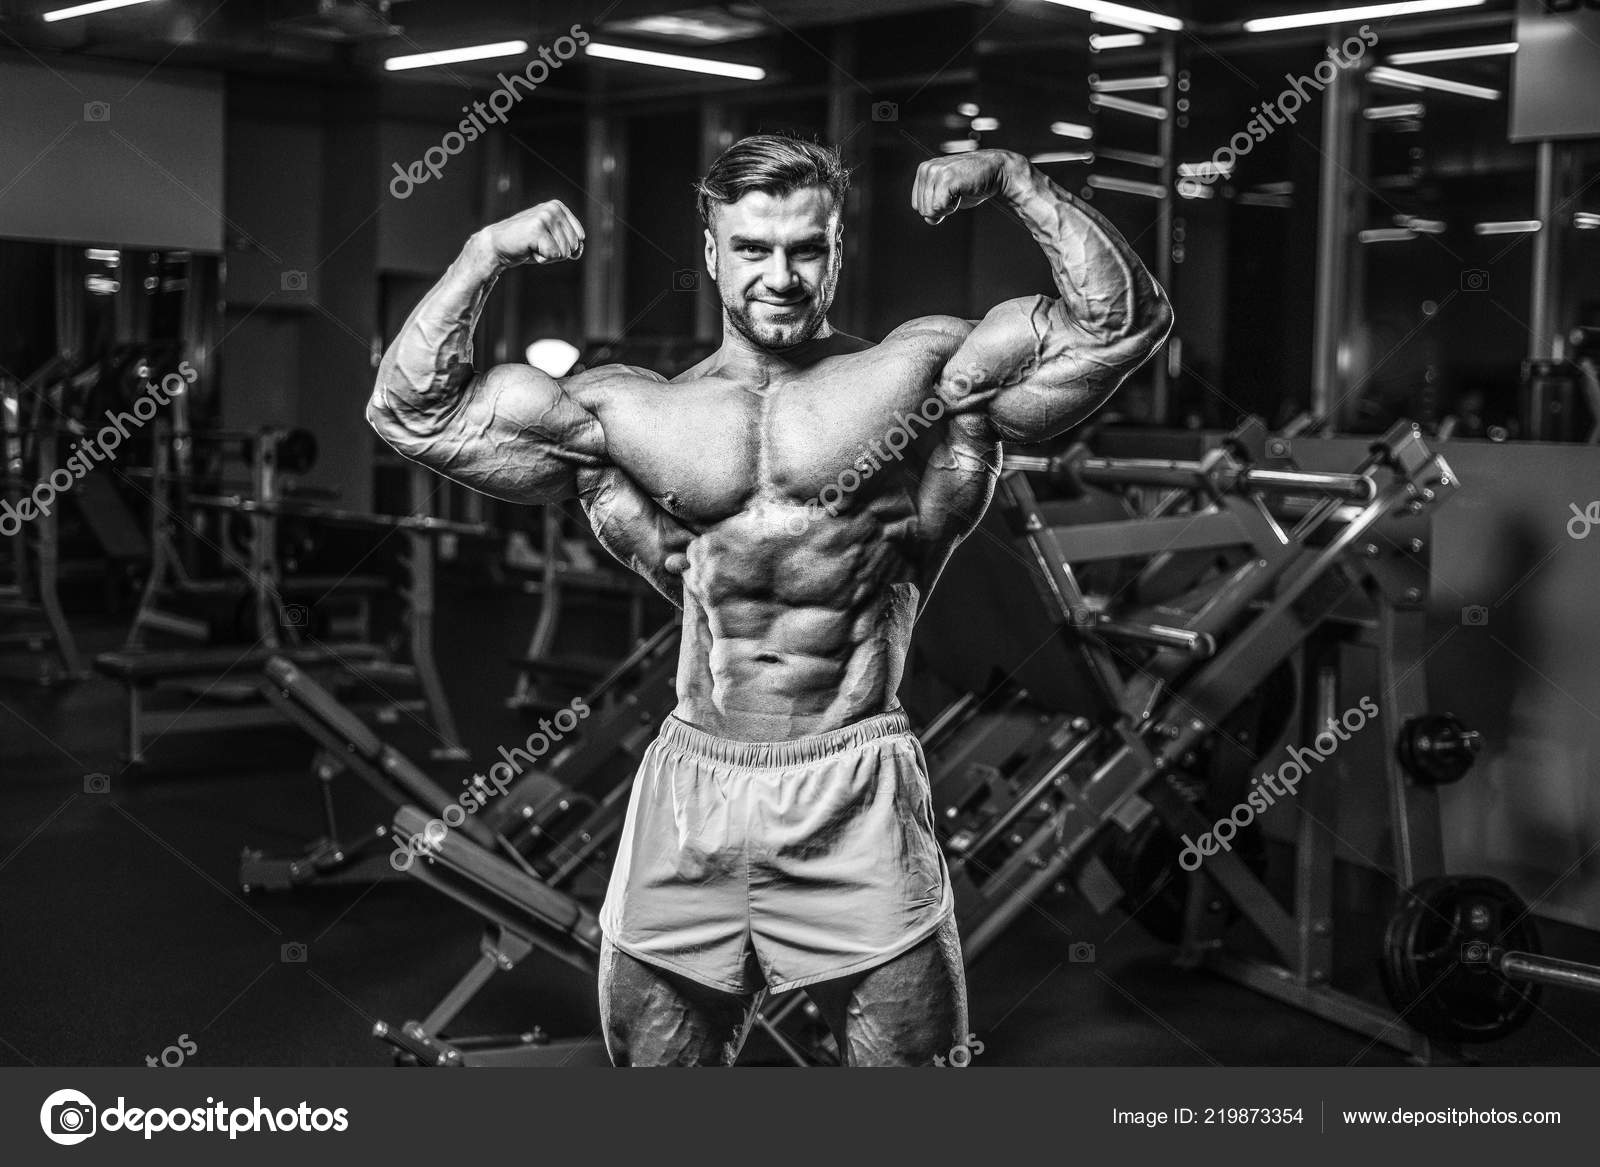 depositphotos 219873354 stock photo handsome young fit muscular caucasian